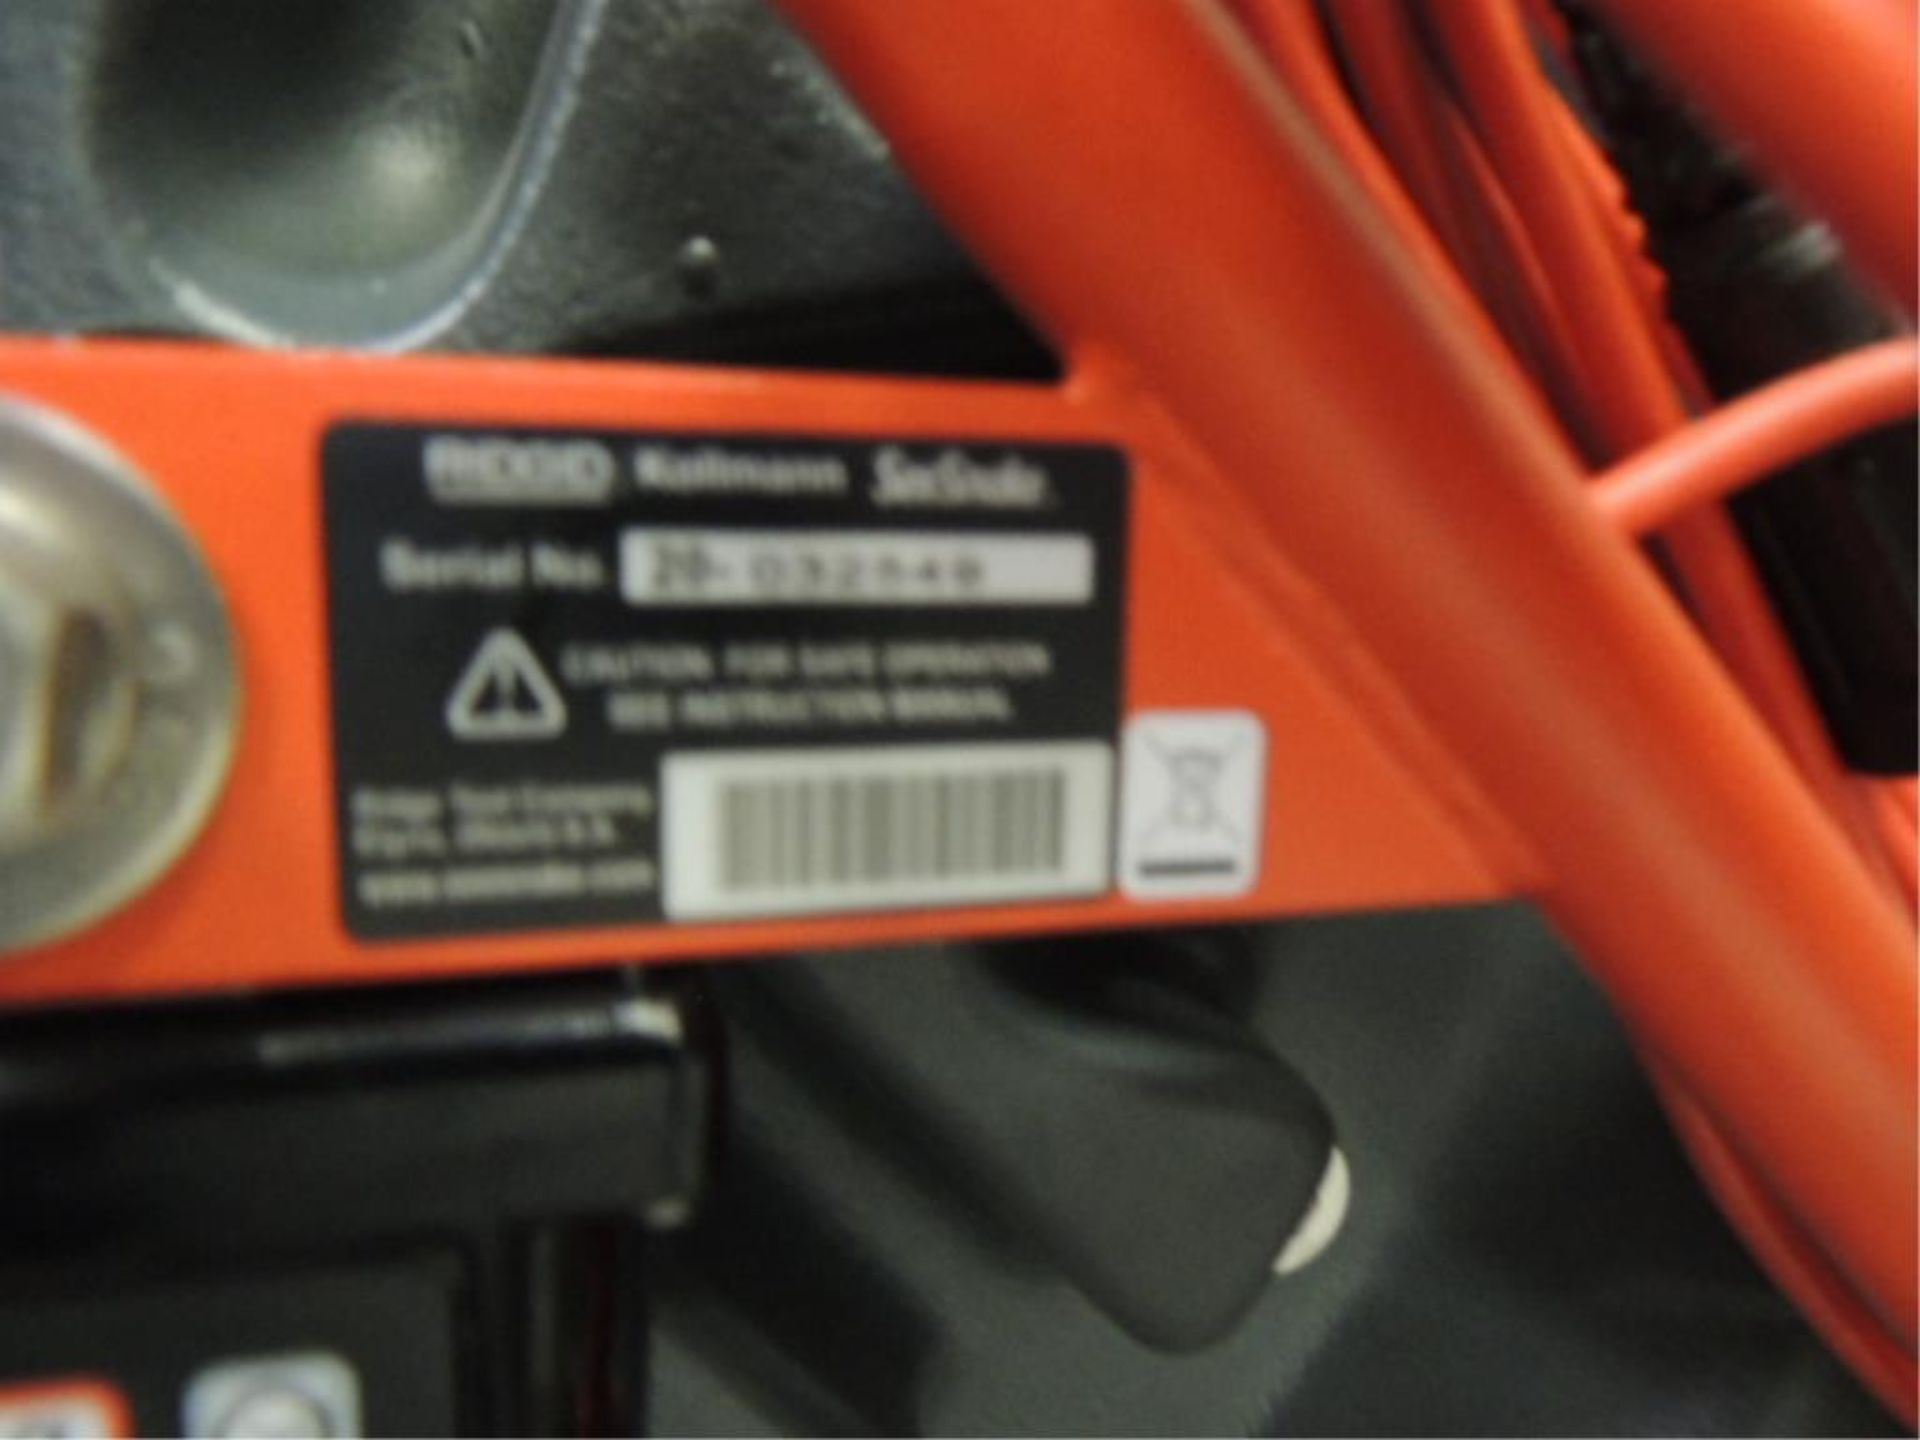 Ridgid 71RK Plumbing; SeeSnake used for clearing clogged lines. SN# 20-032554+9. HIT# 2192513. - Image 6 of 6